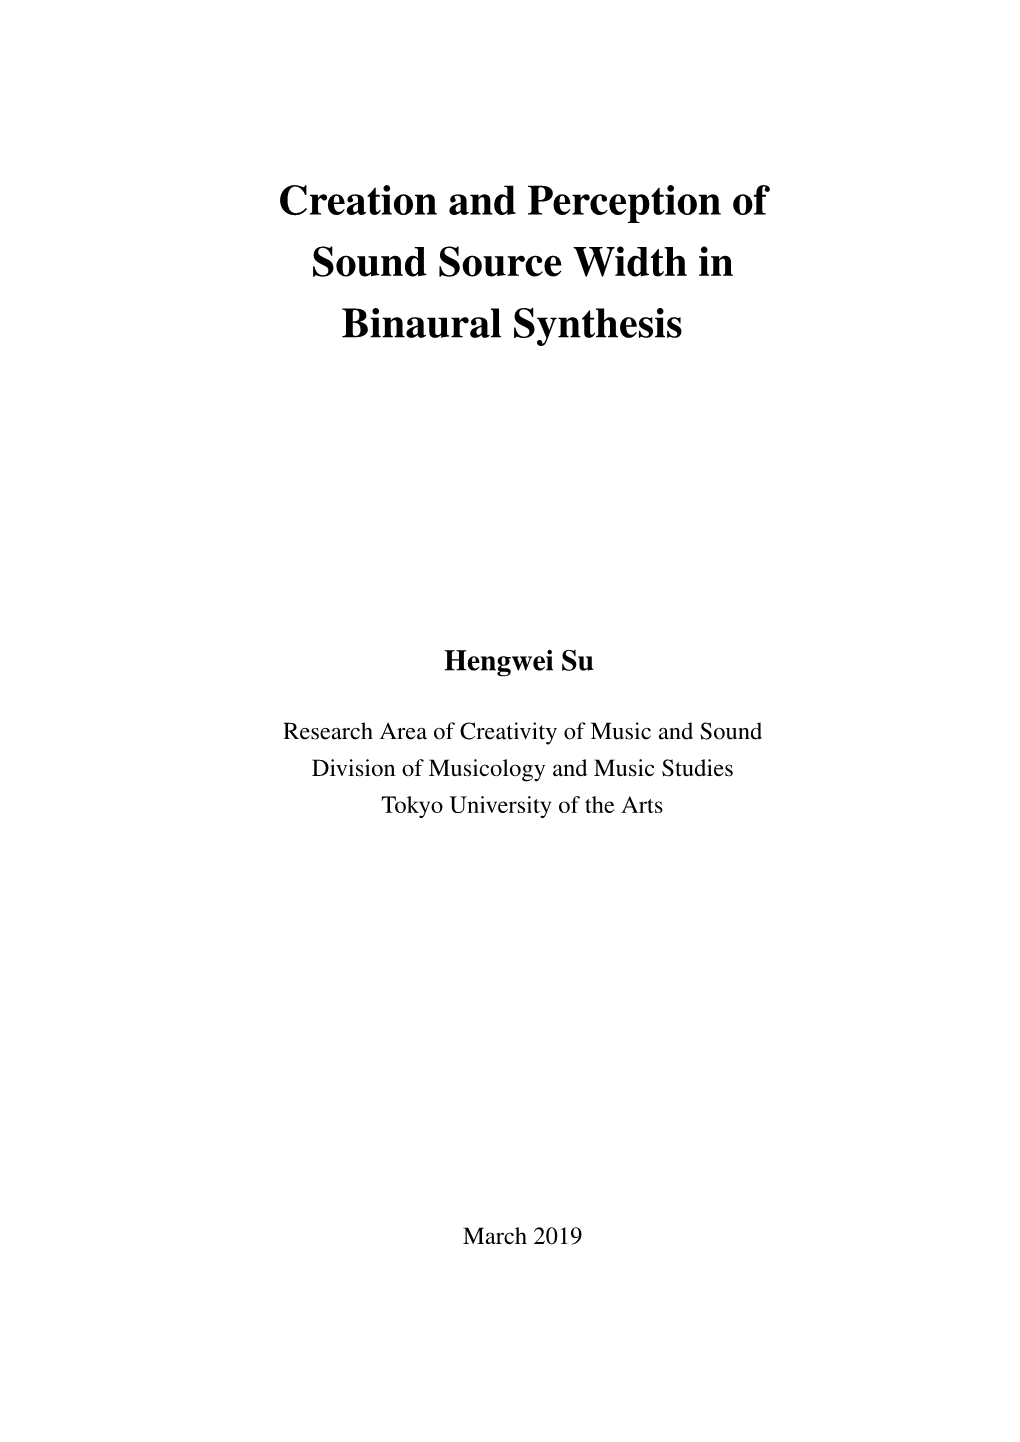 Creation and Perception of Sound Source Width in Binaural Synthesis